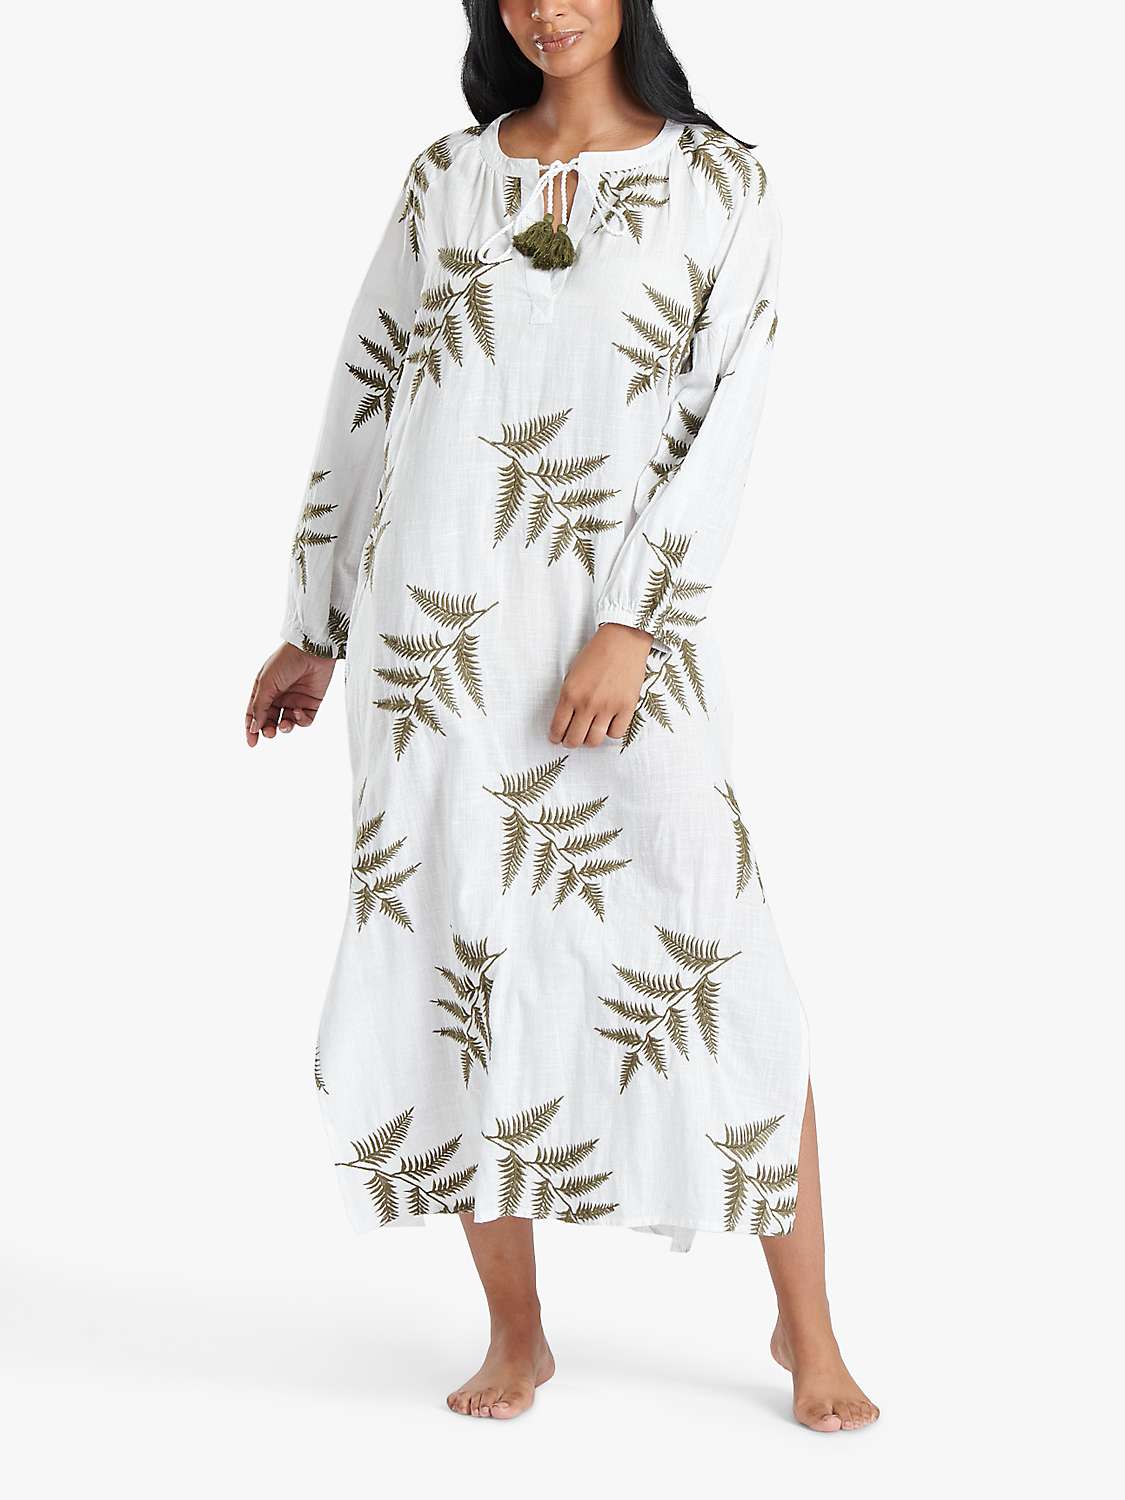 Buy South Beach Embroidered Tie Neck Maxi Beach Dress, White/Olive Online at johnlewis.com